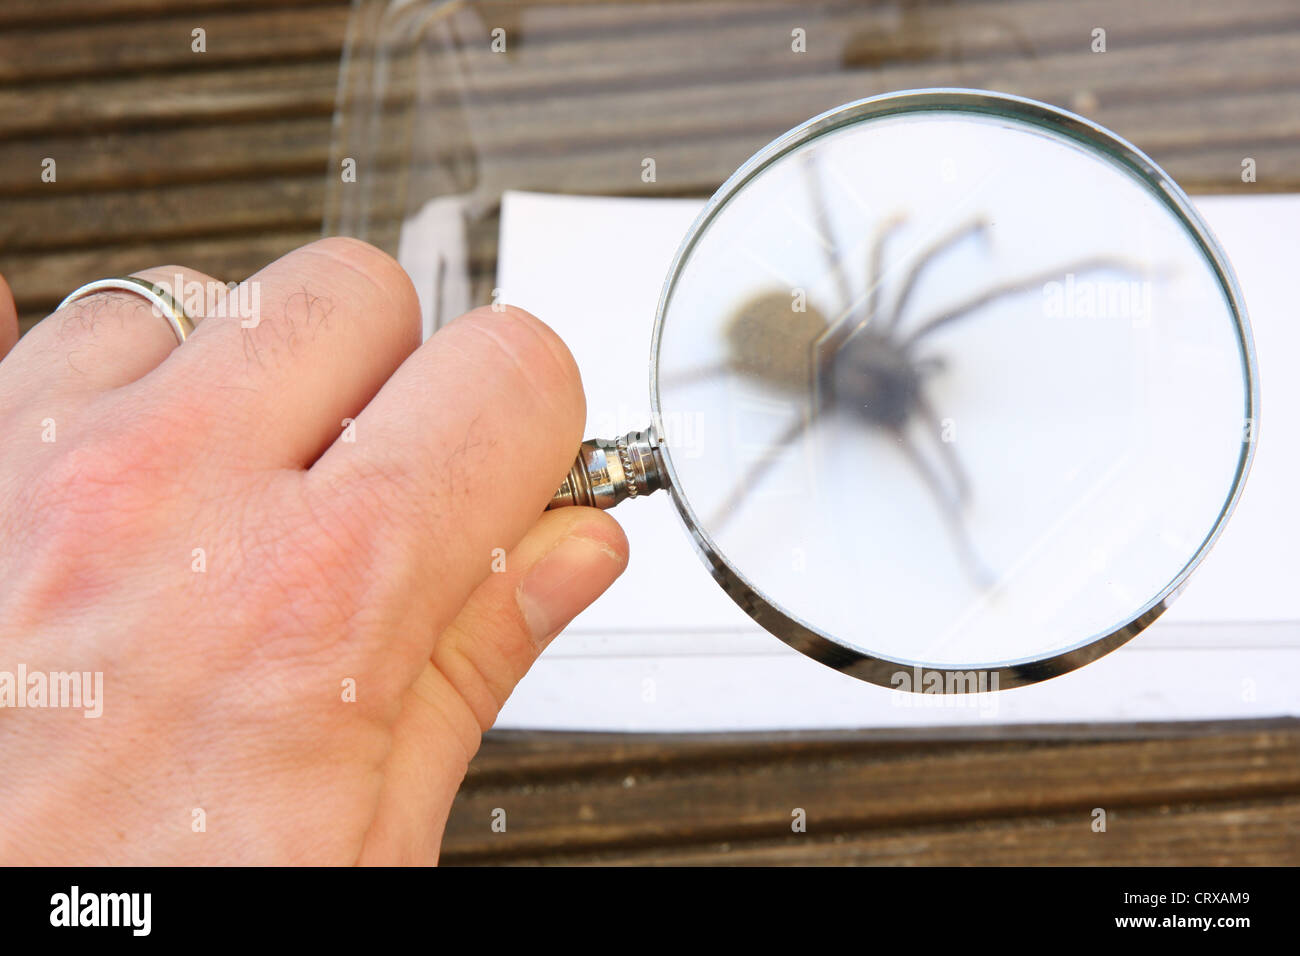 A person looking at a common House Spider through a magnifying glass. Stock Photo